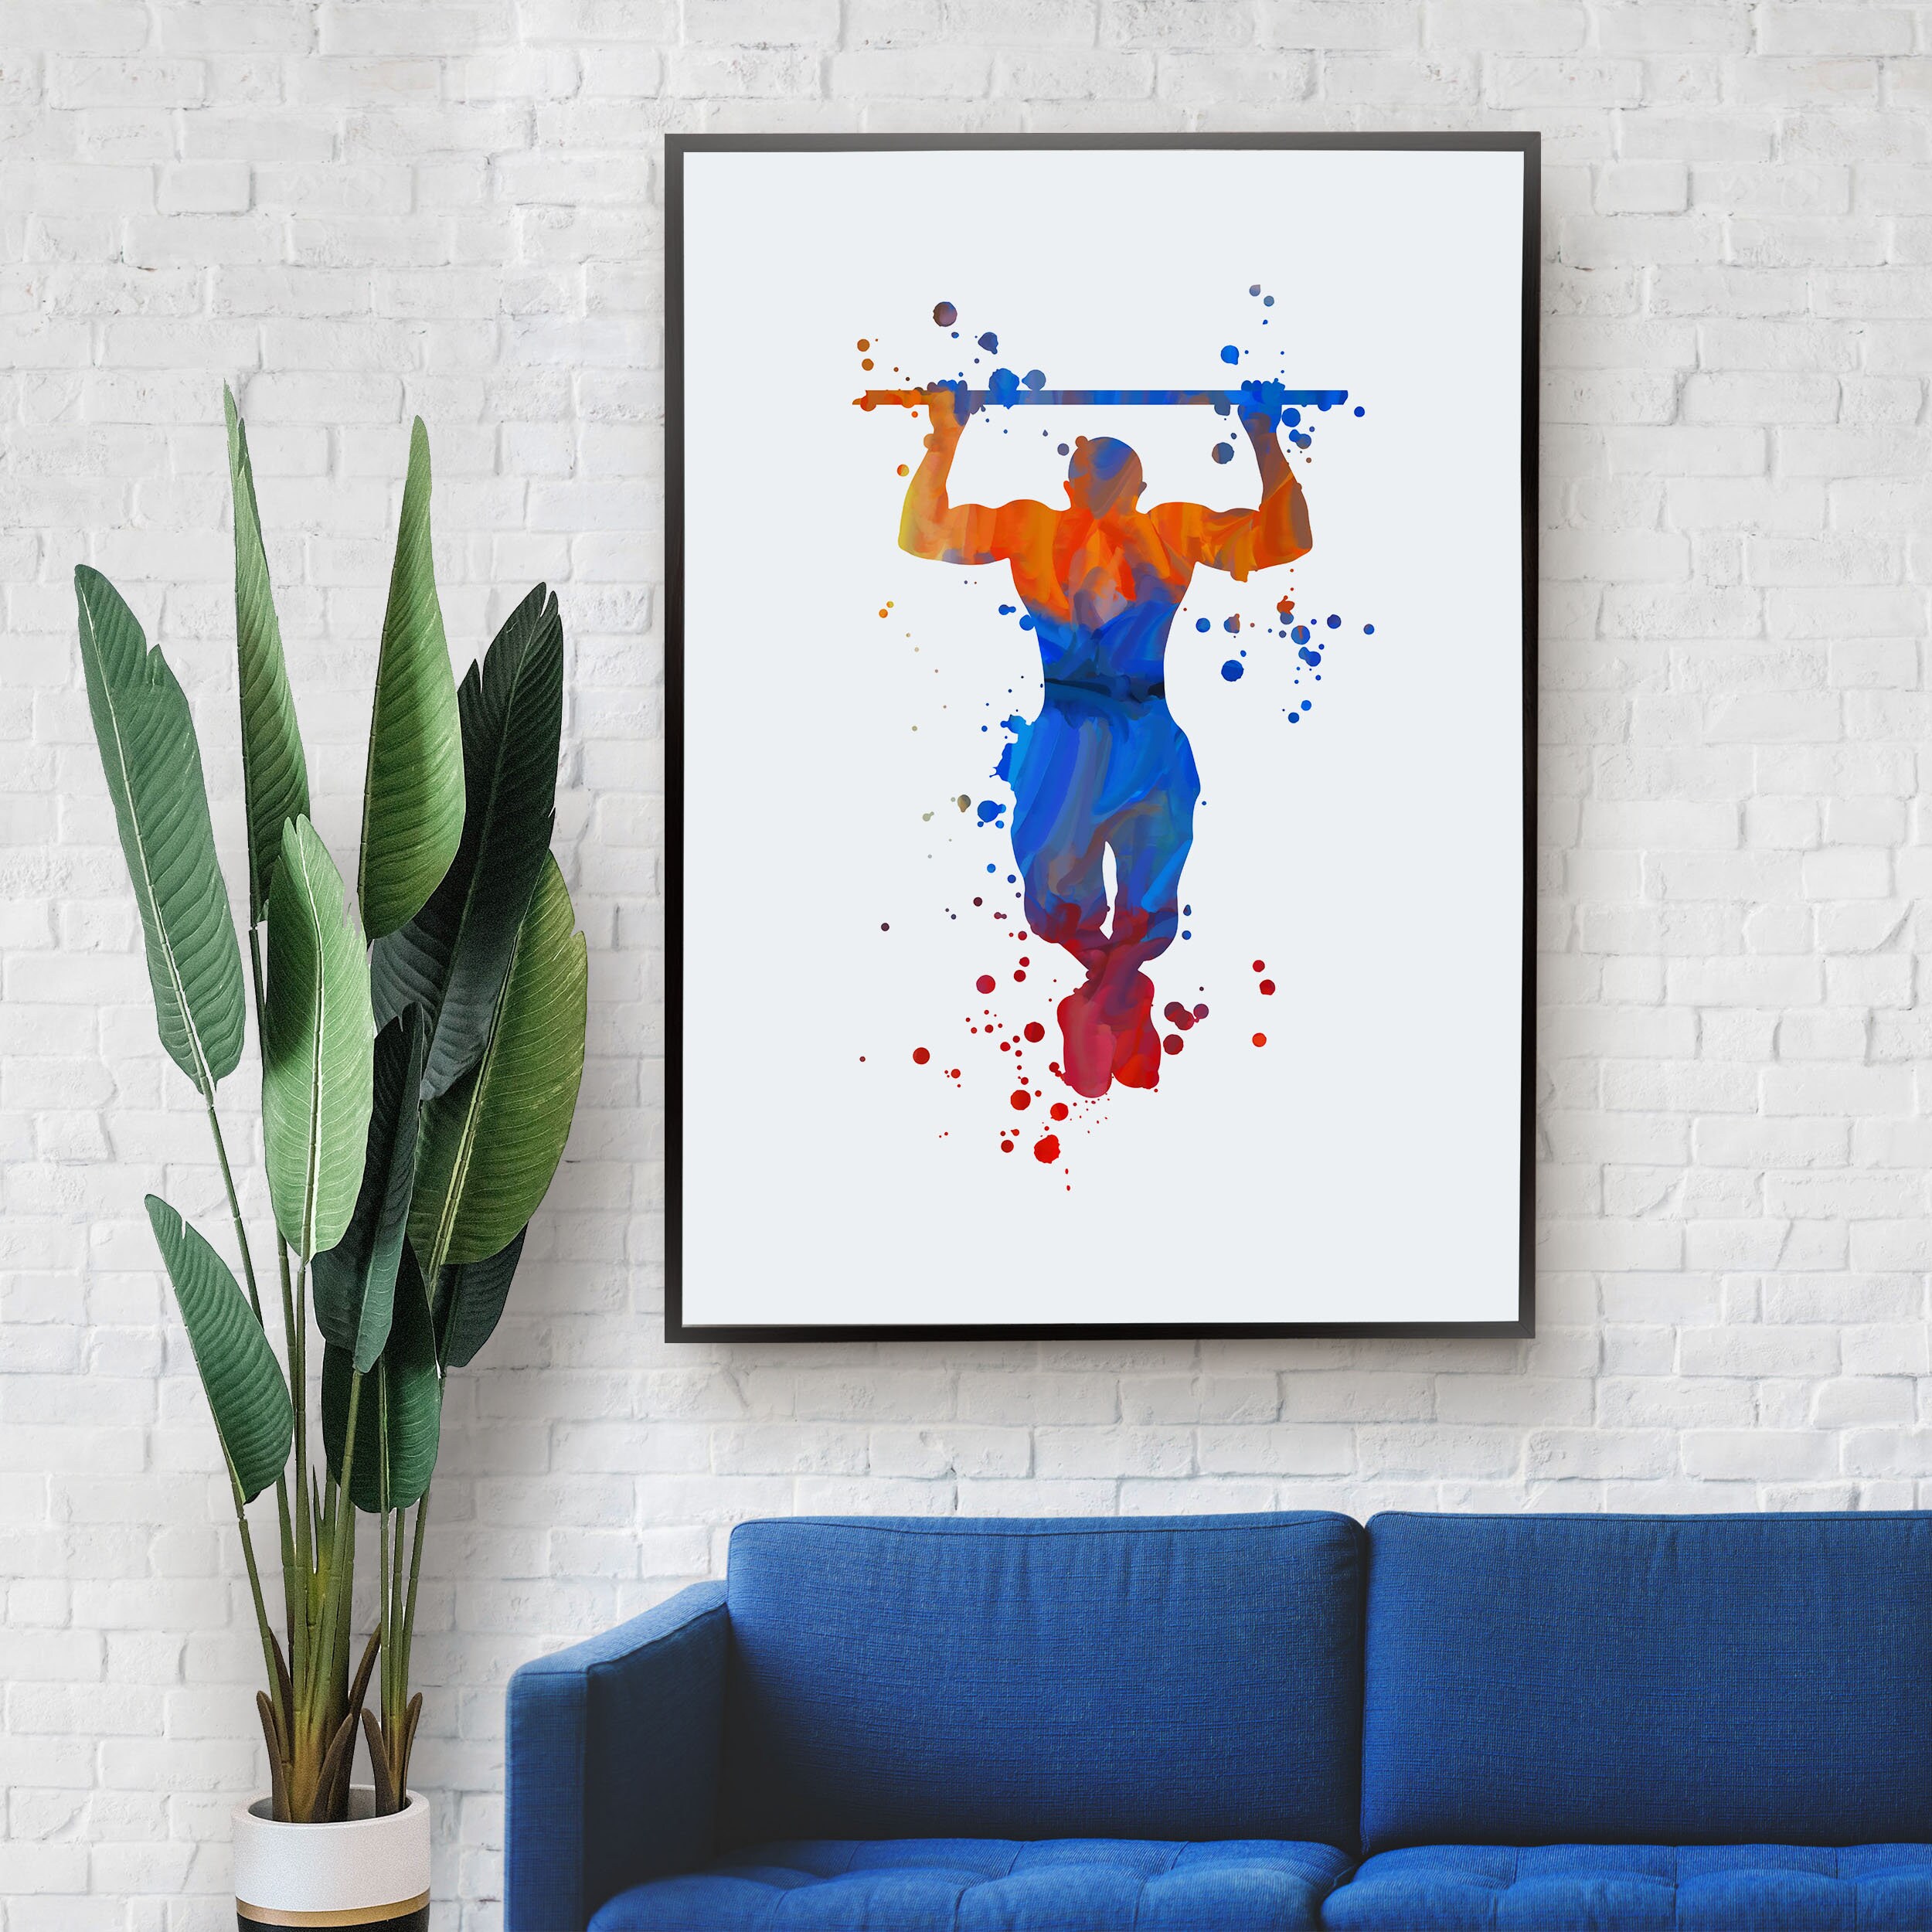  Sport Birthday Decorations,Treadmill Man Workout Print,Fitness  Gifts For Men,Gym Art Printable,Exercise Room Decor,Watercolor Sport Art  Print,Boy Sports Room Decor,8x12 Inch Framed Wall Art: Posters & Prints